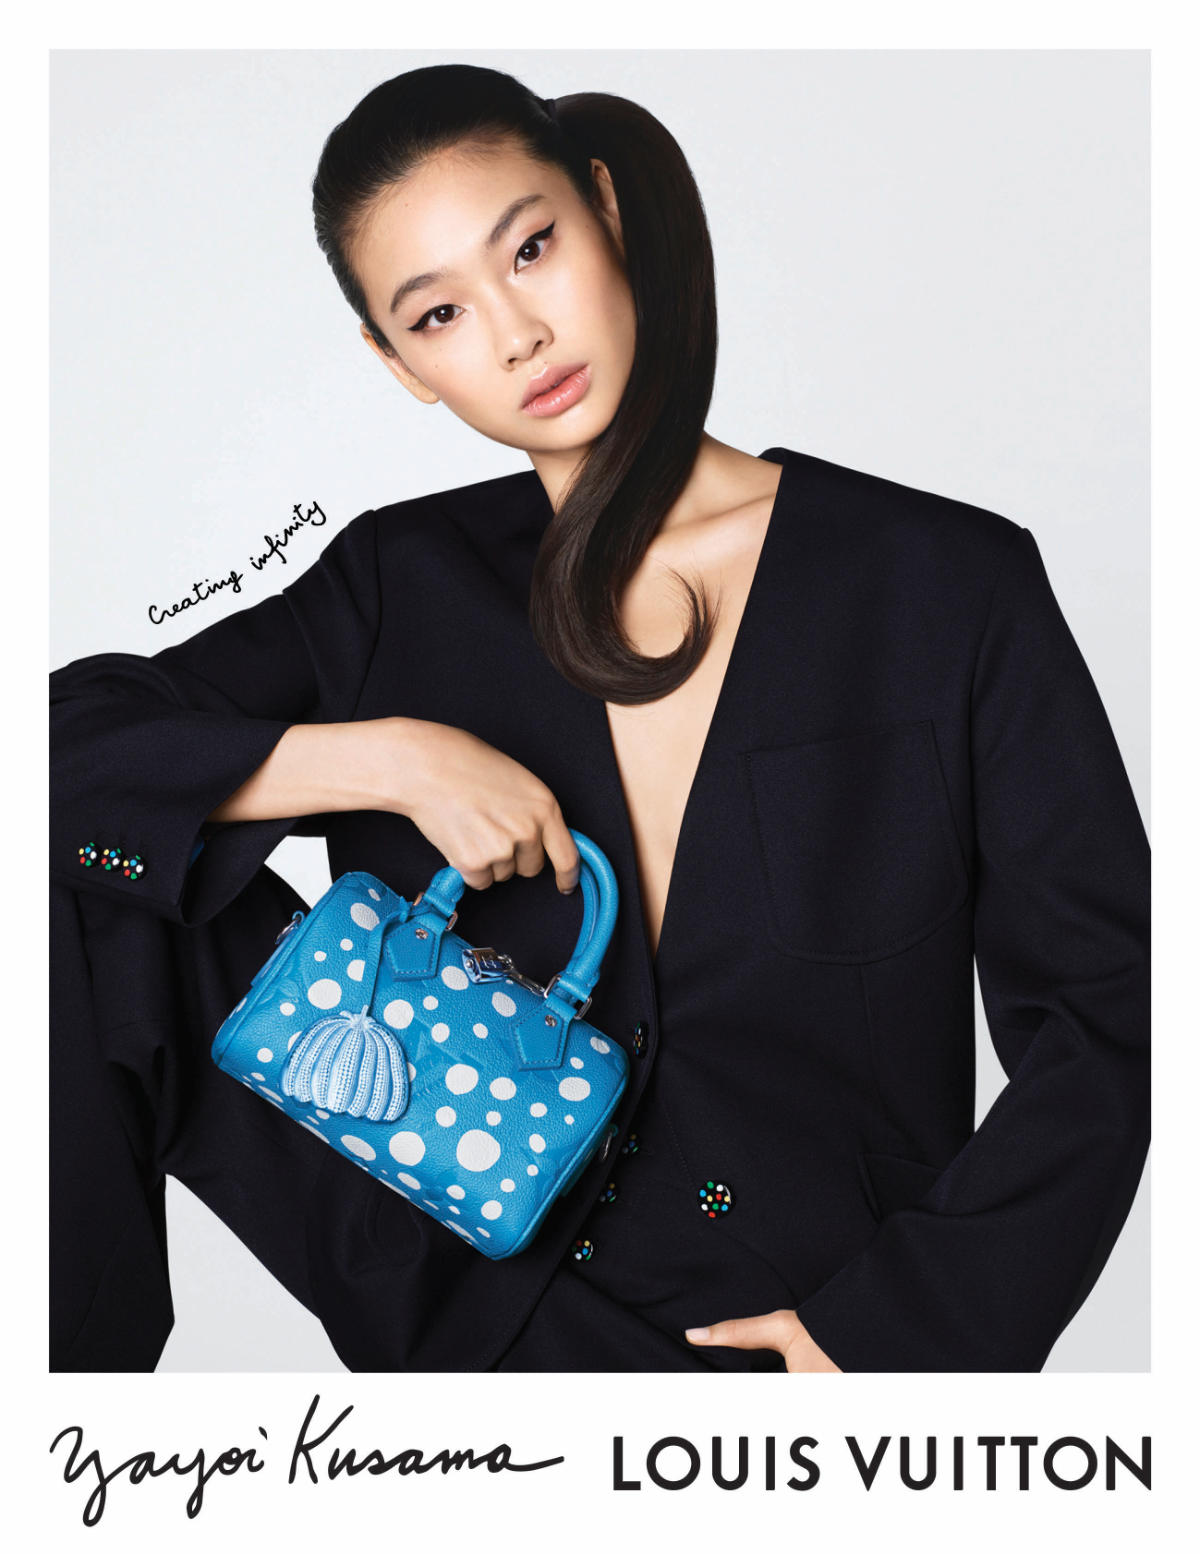 Louis Vuitton X Yayoi Kusama: Advertising Campaign For Drop 2 Of “Creating Infinity”